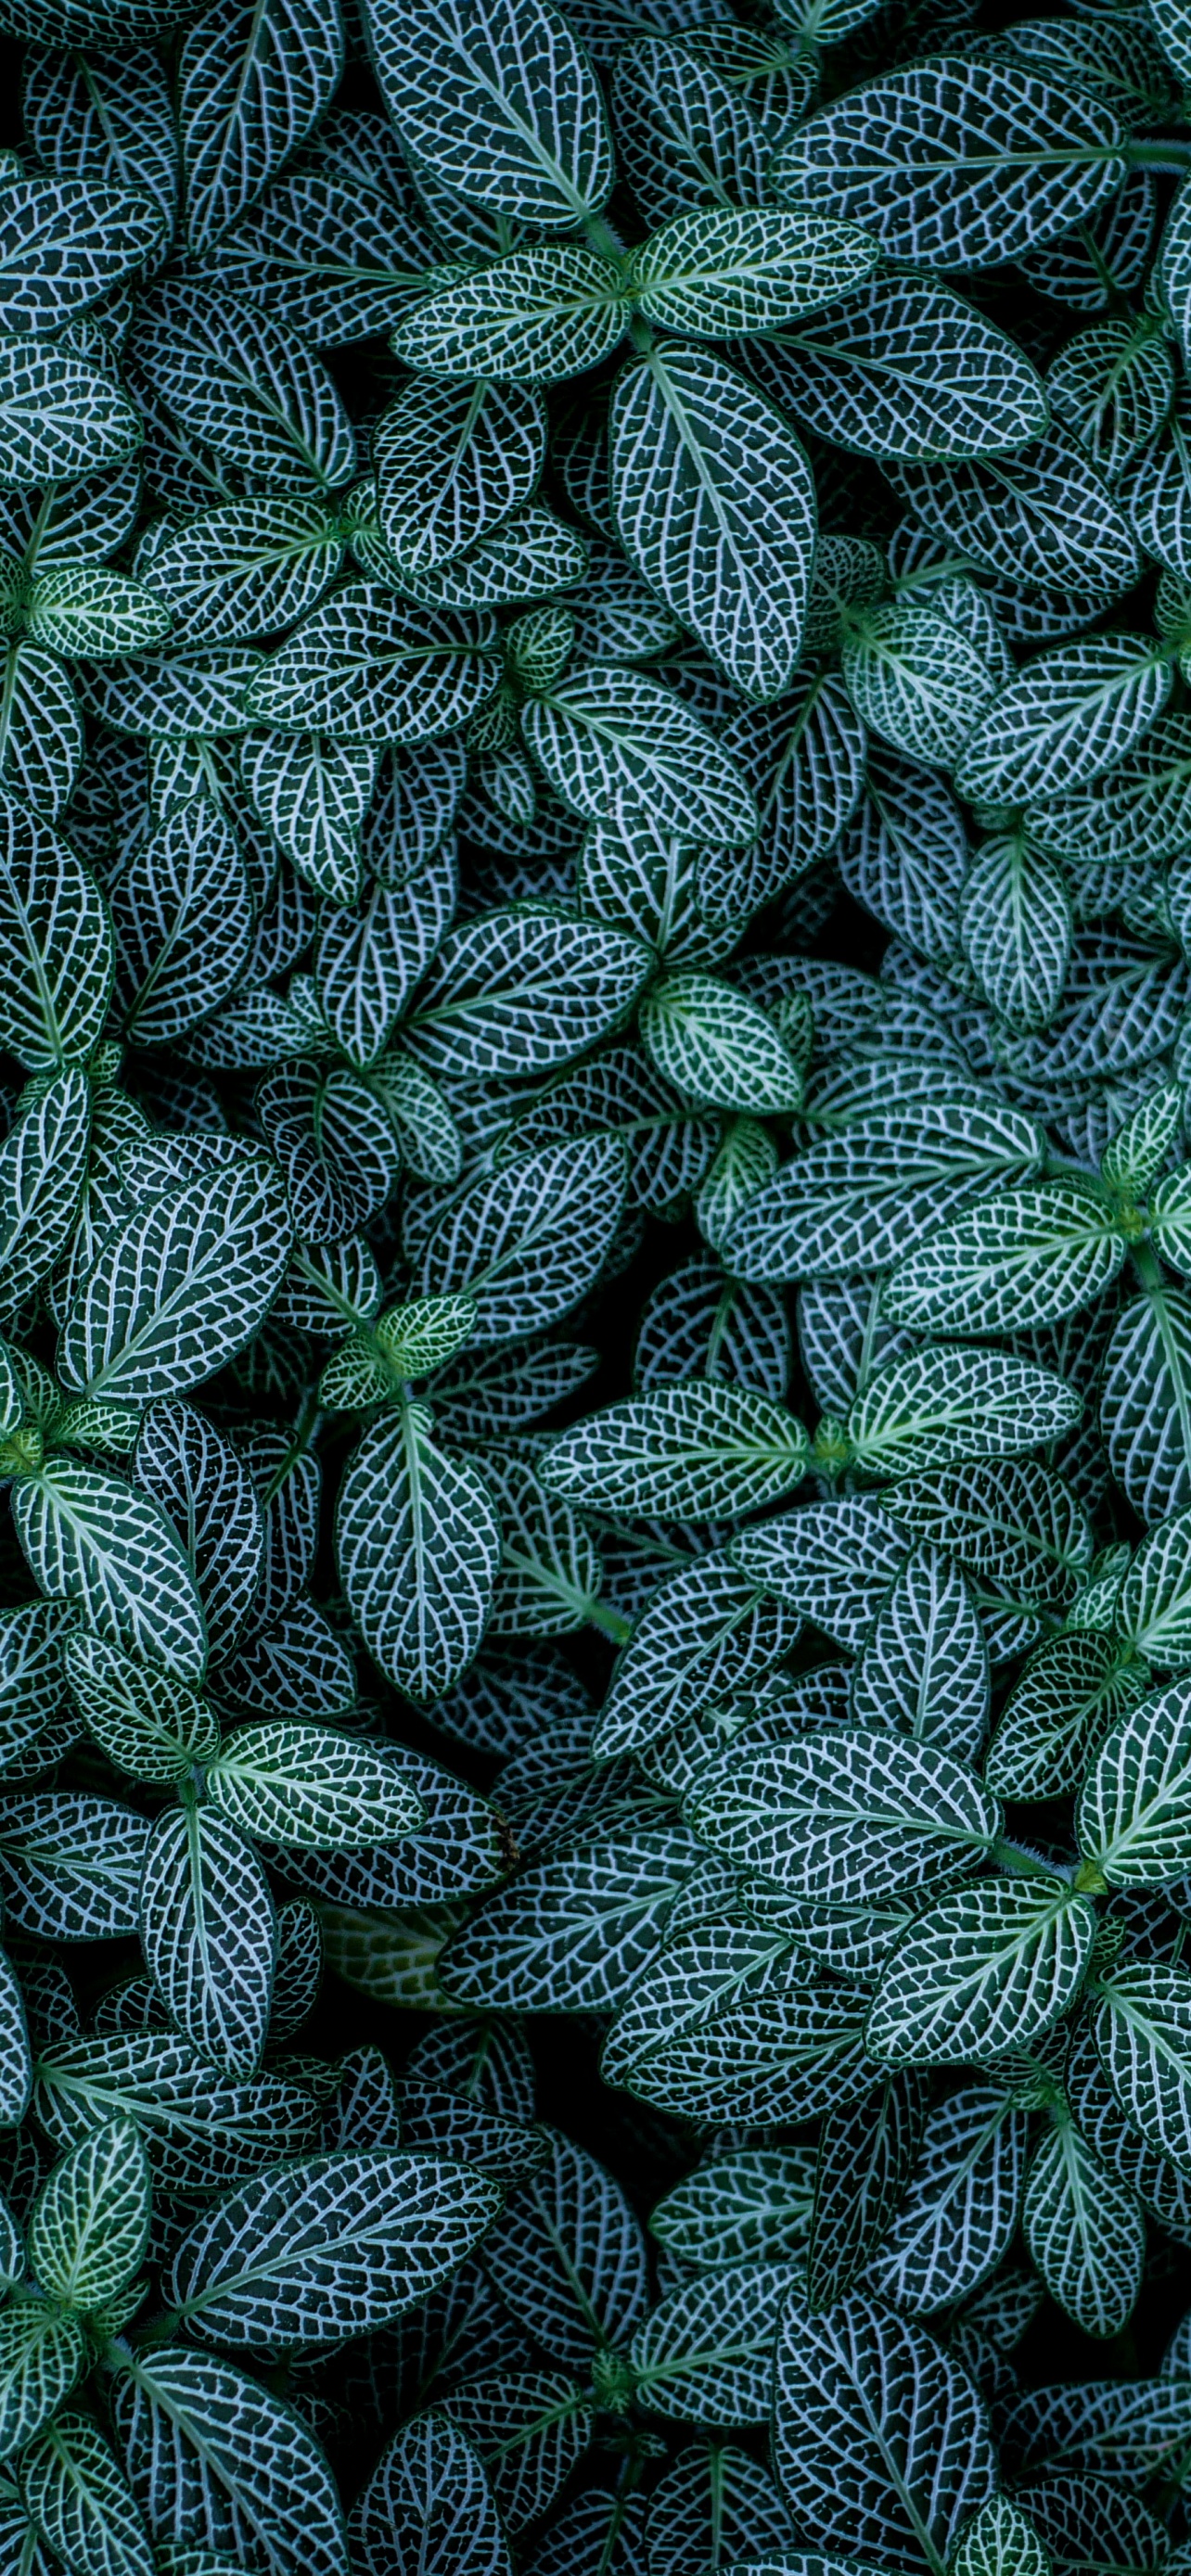 Green Leaves IPhone Wallpaper HD  IPhone Wallpapers  iPhone Wallpapers